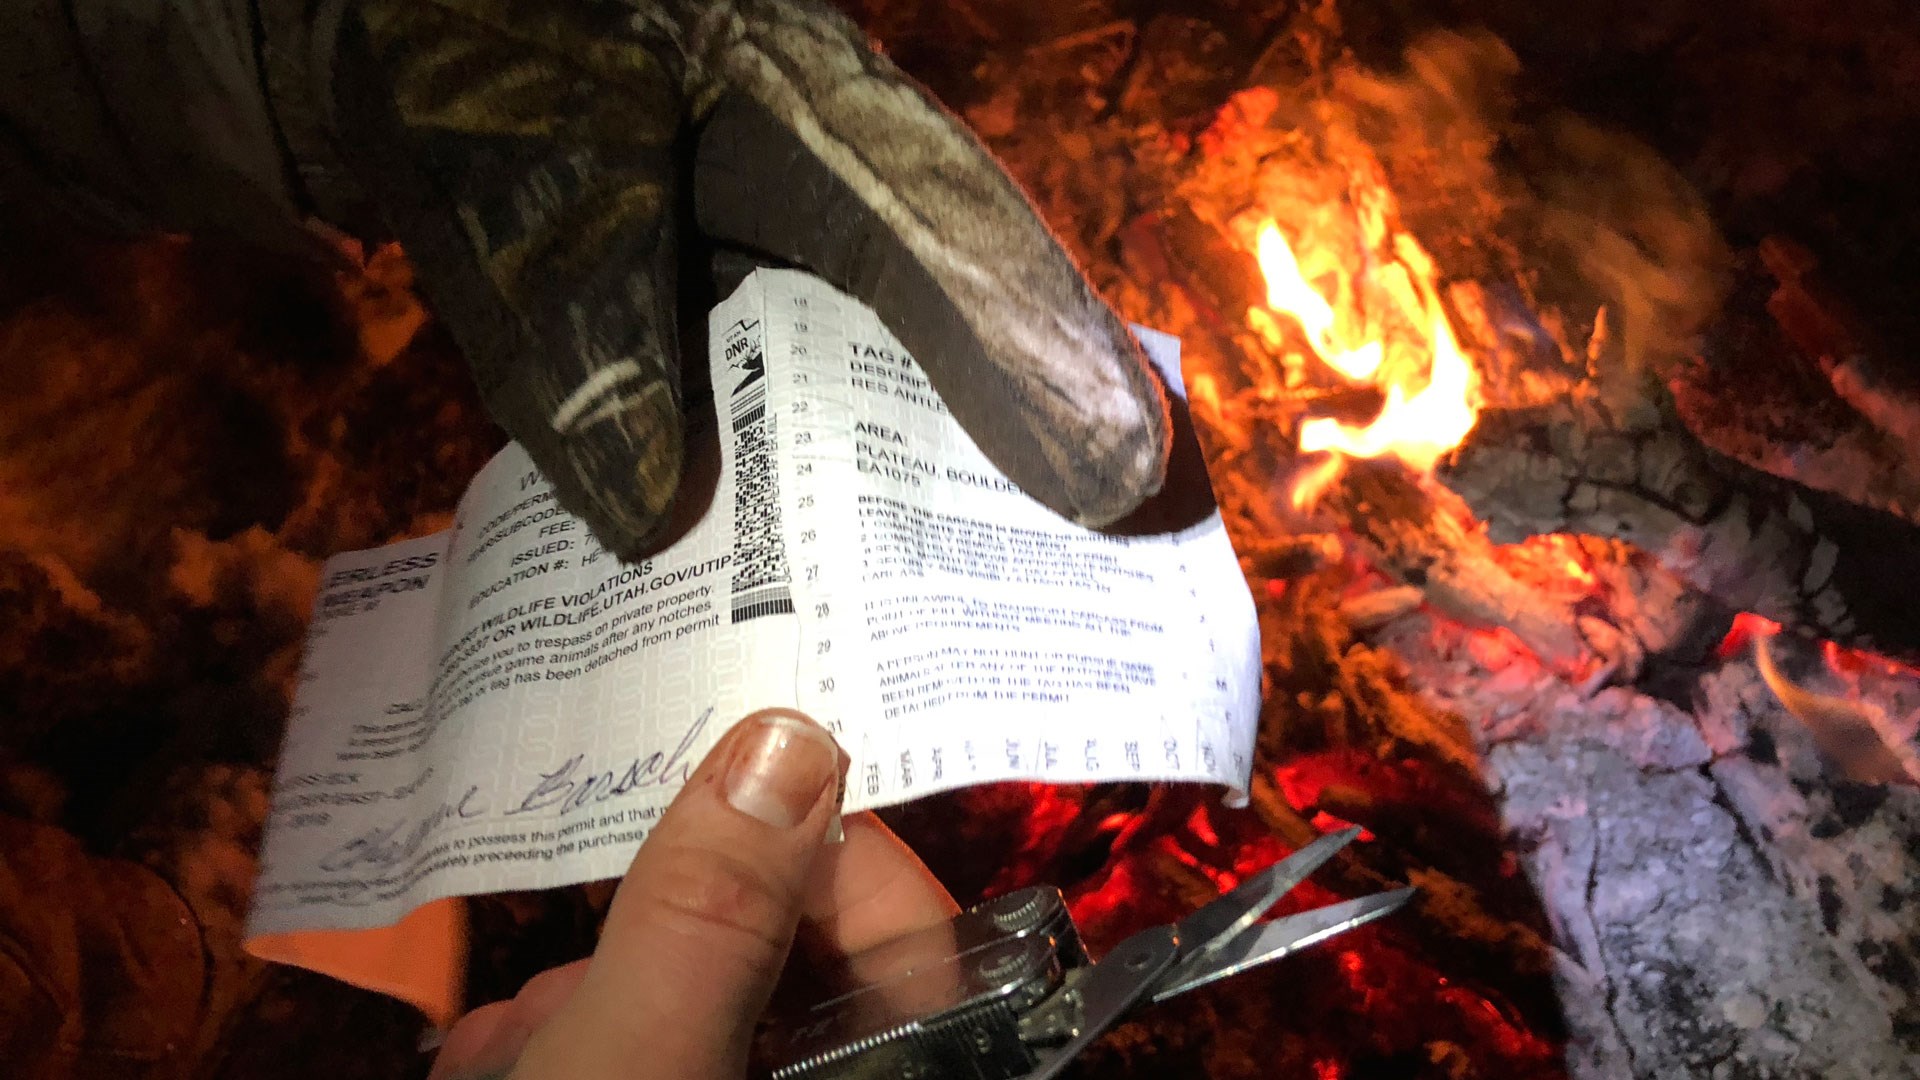 Notching a tag by the fire.